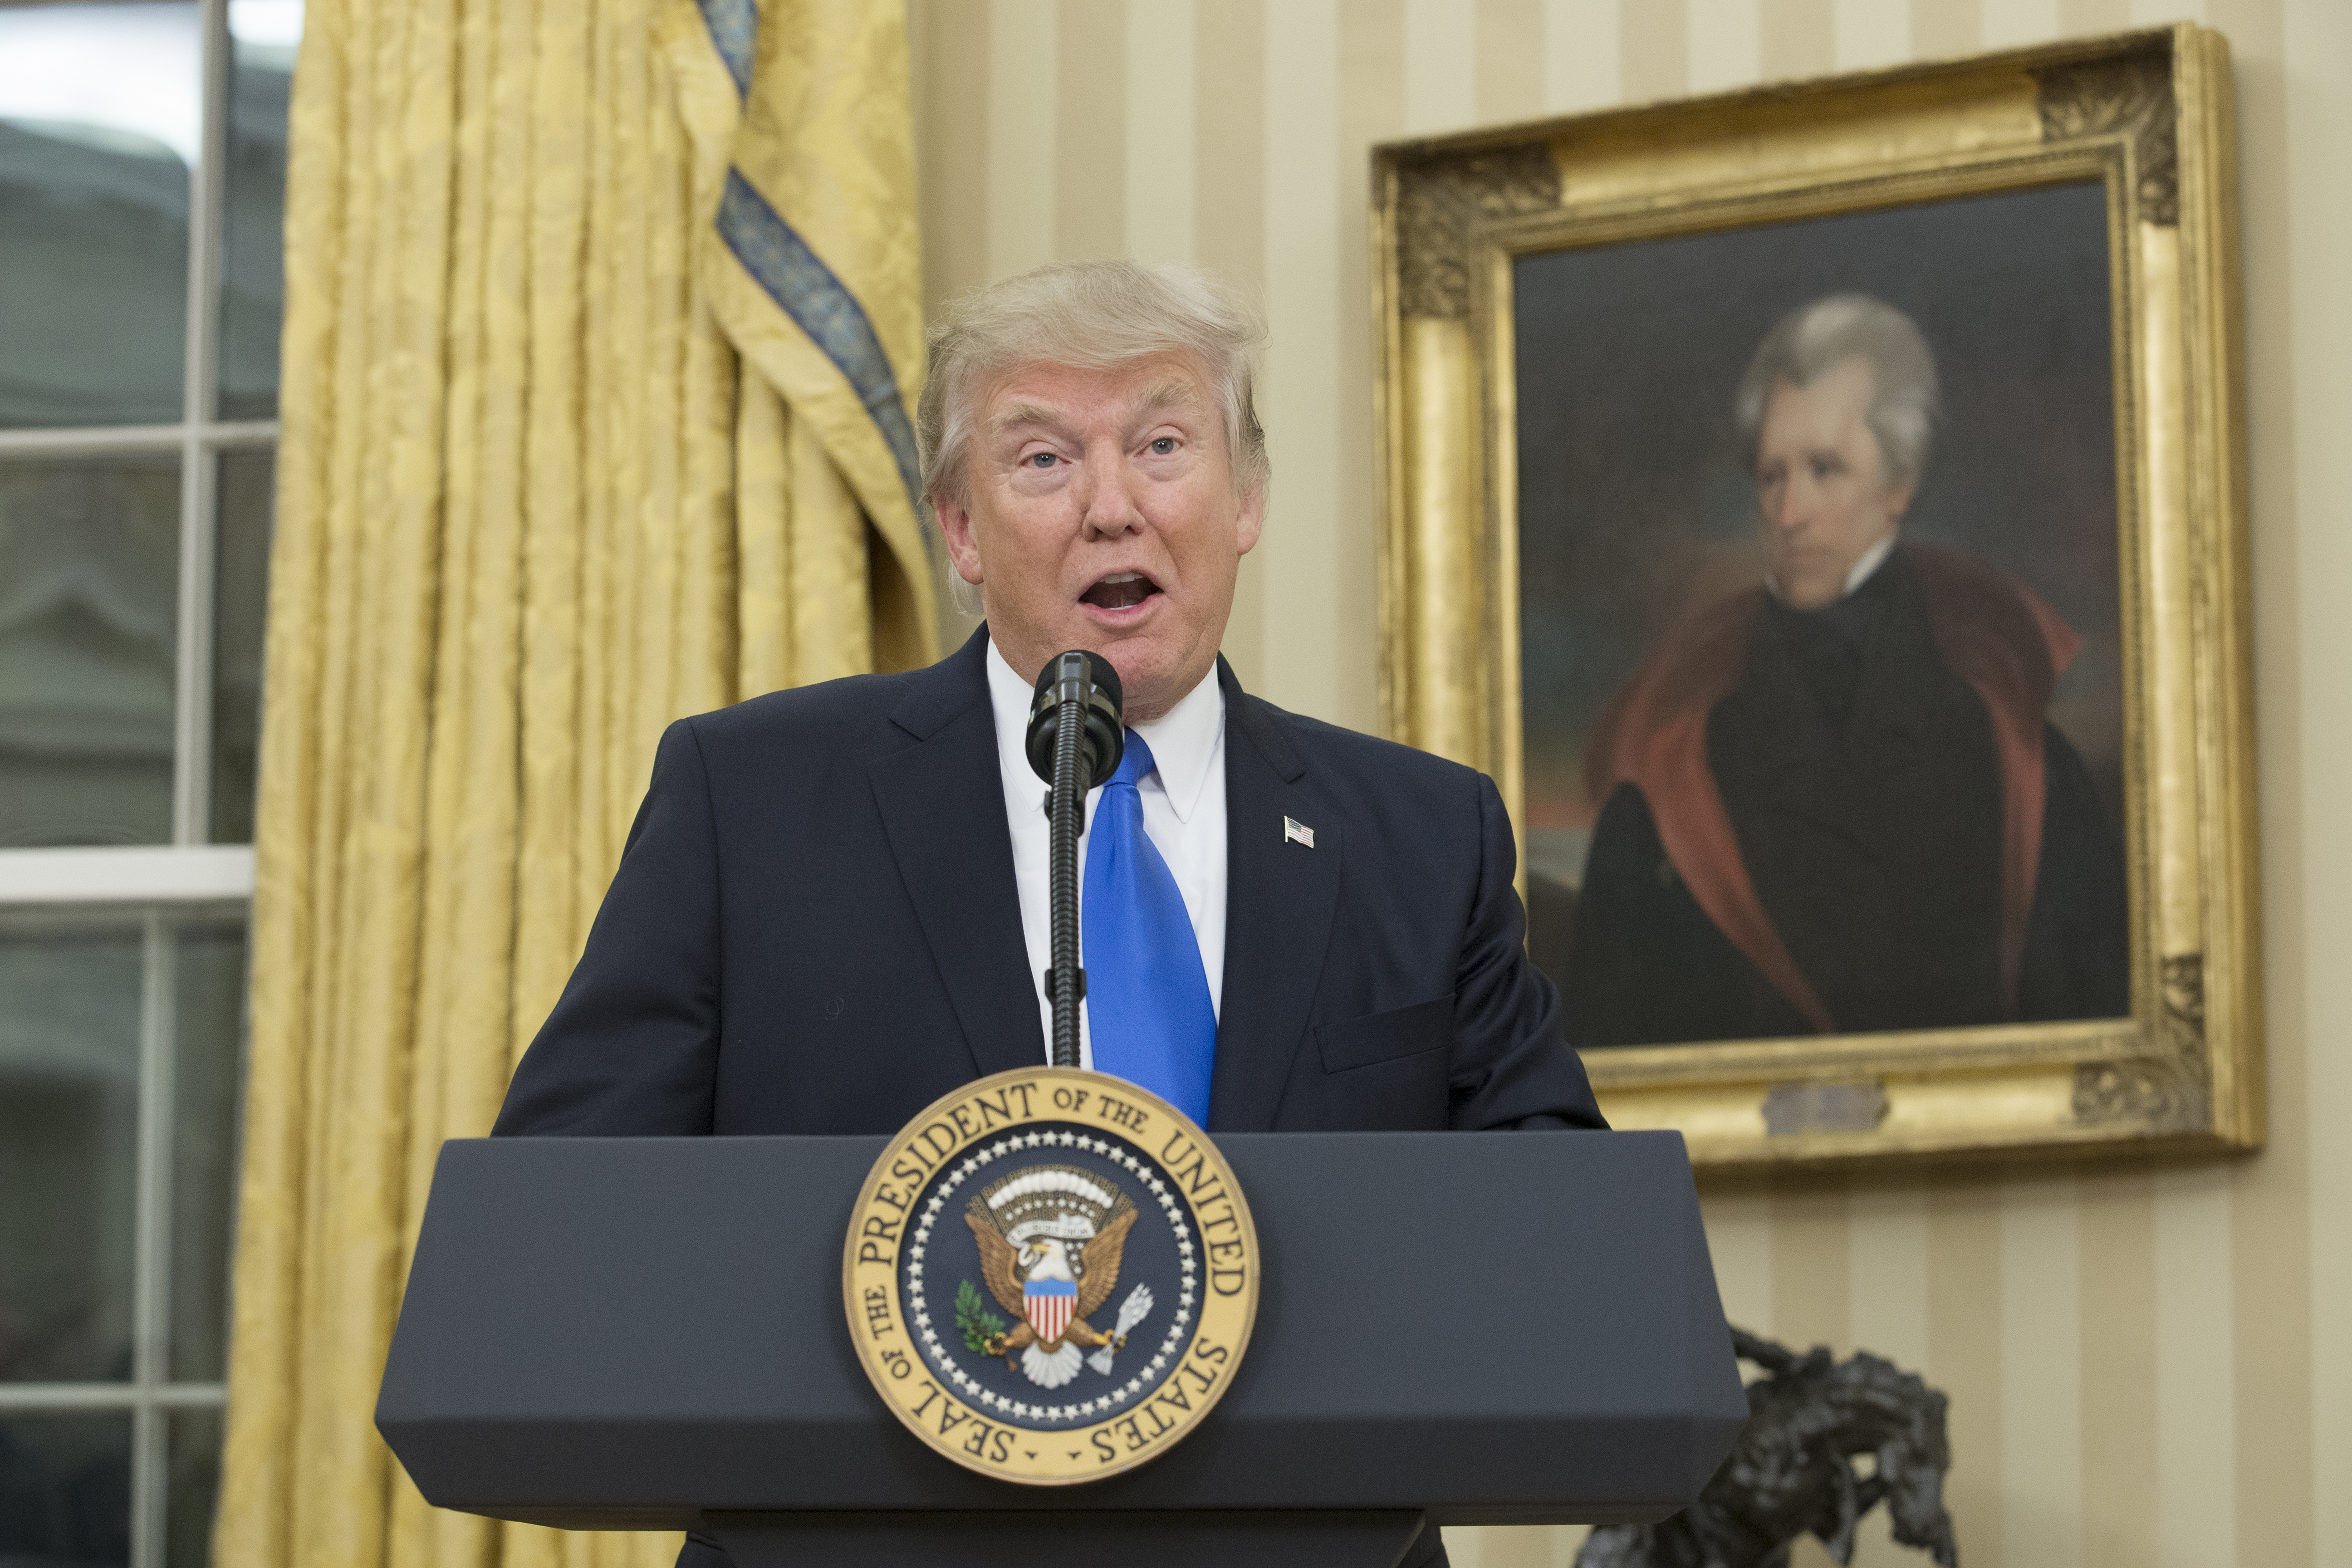 President Donald Trump stands before a portrait of President Andrew Jackson in the Oval Office.